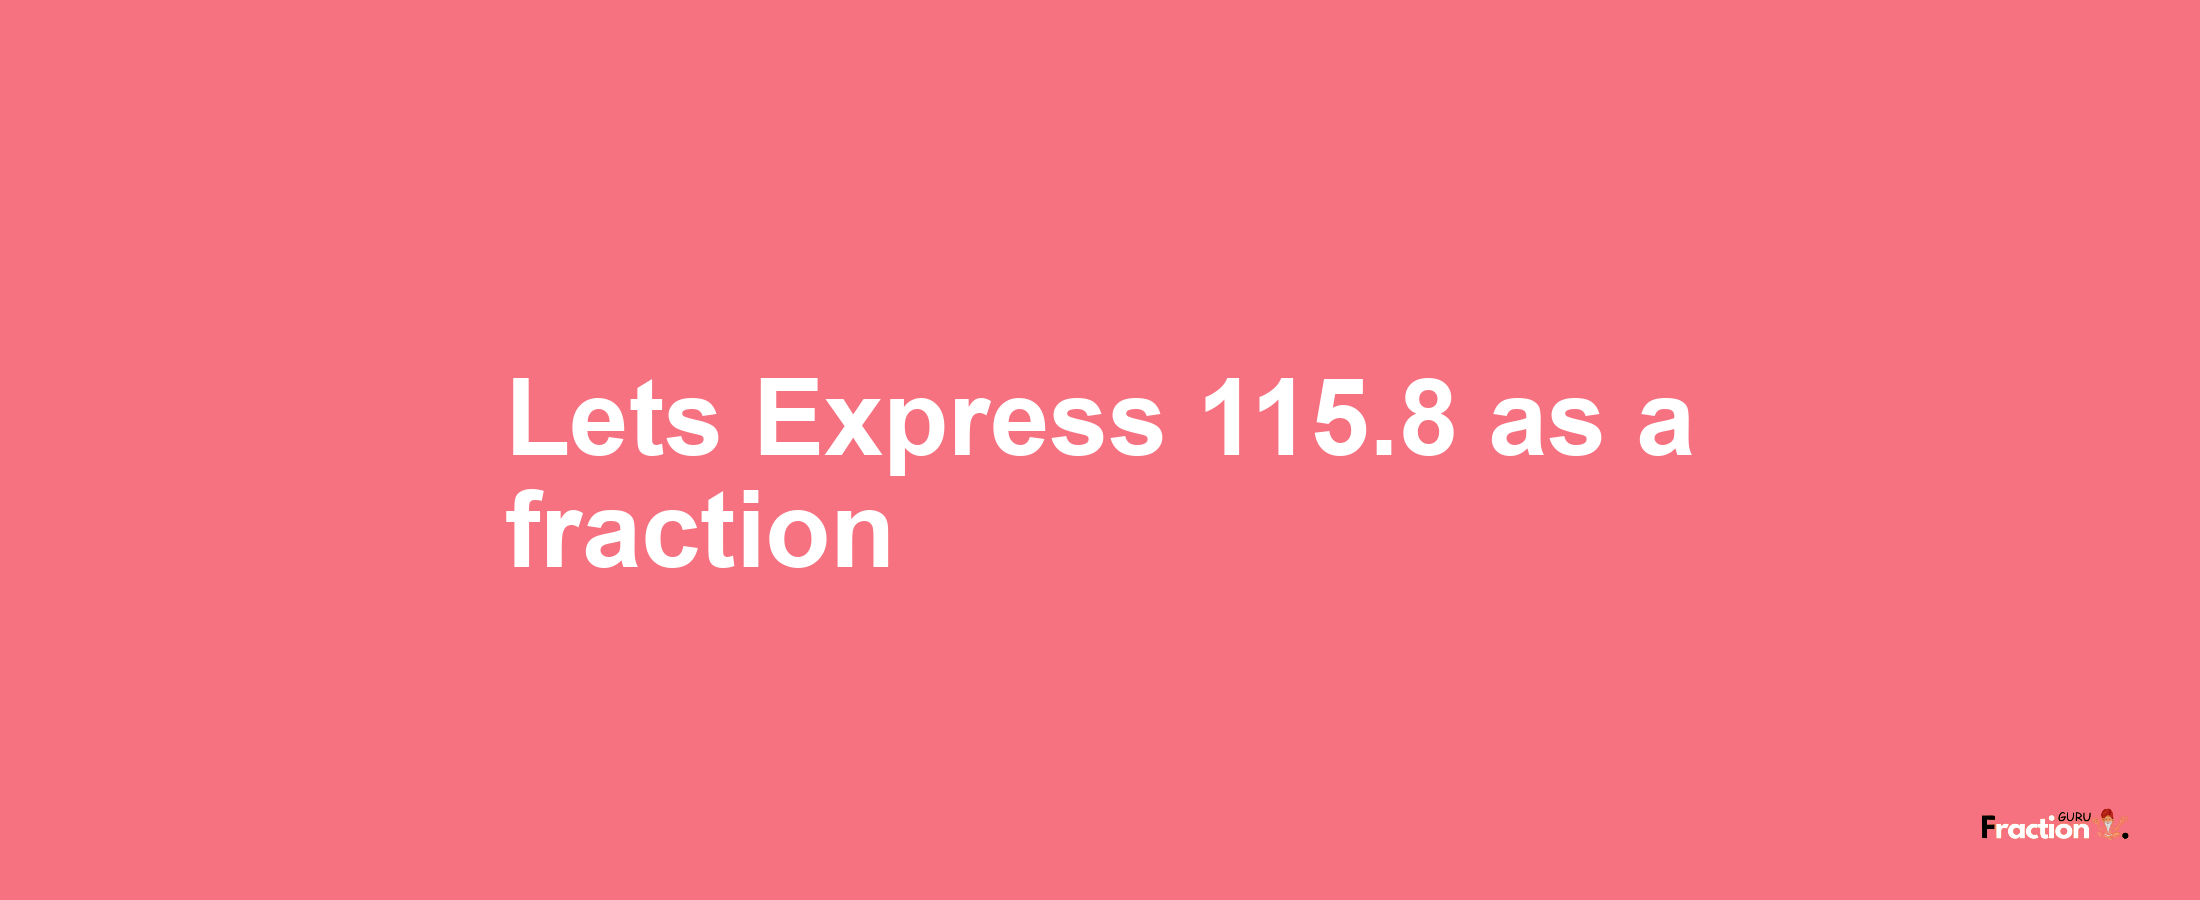 Lets Express 115.8 as afraction